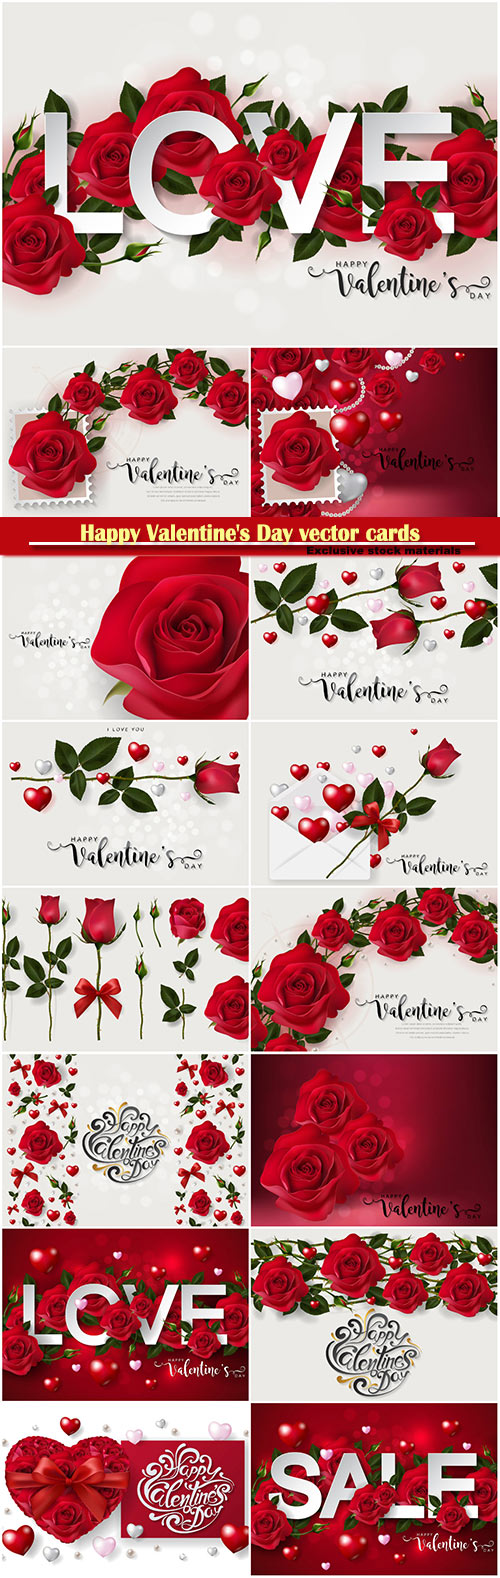 Happy Valentine's Day vector cards, red roses and hearts, romantic backgrounds